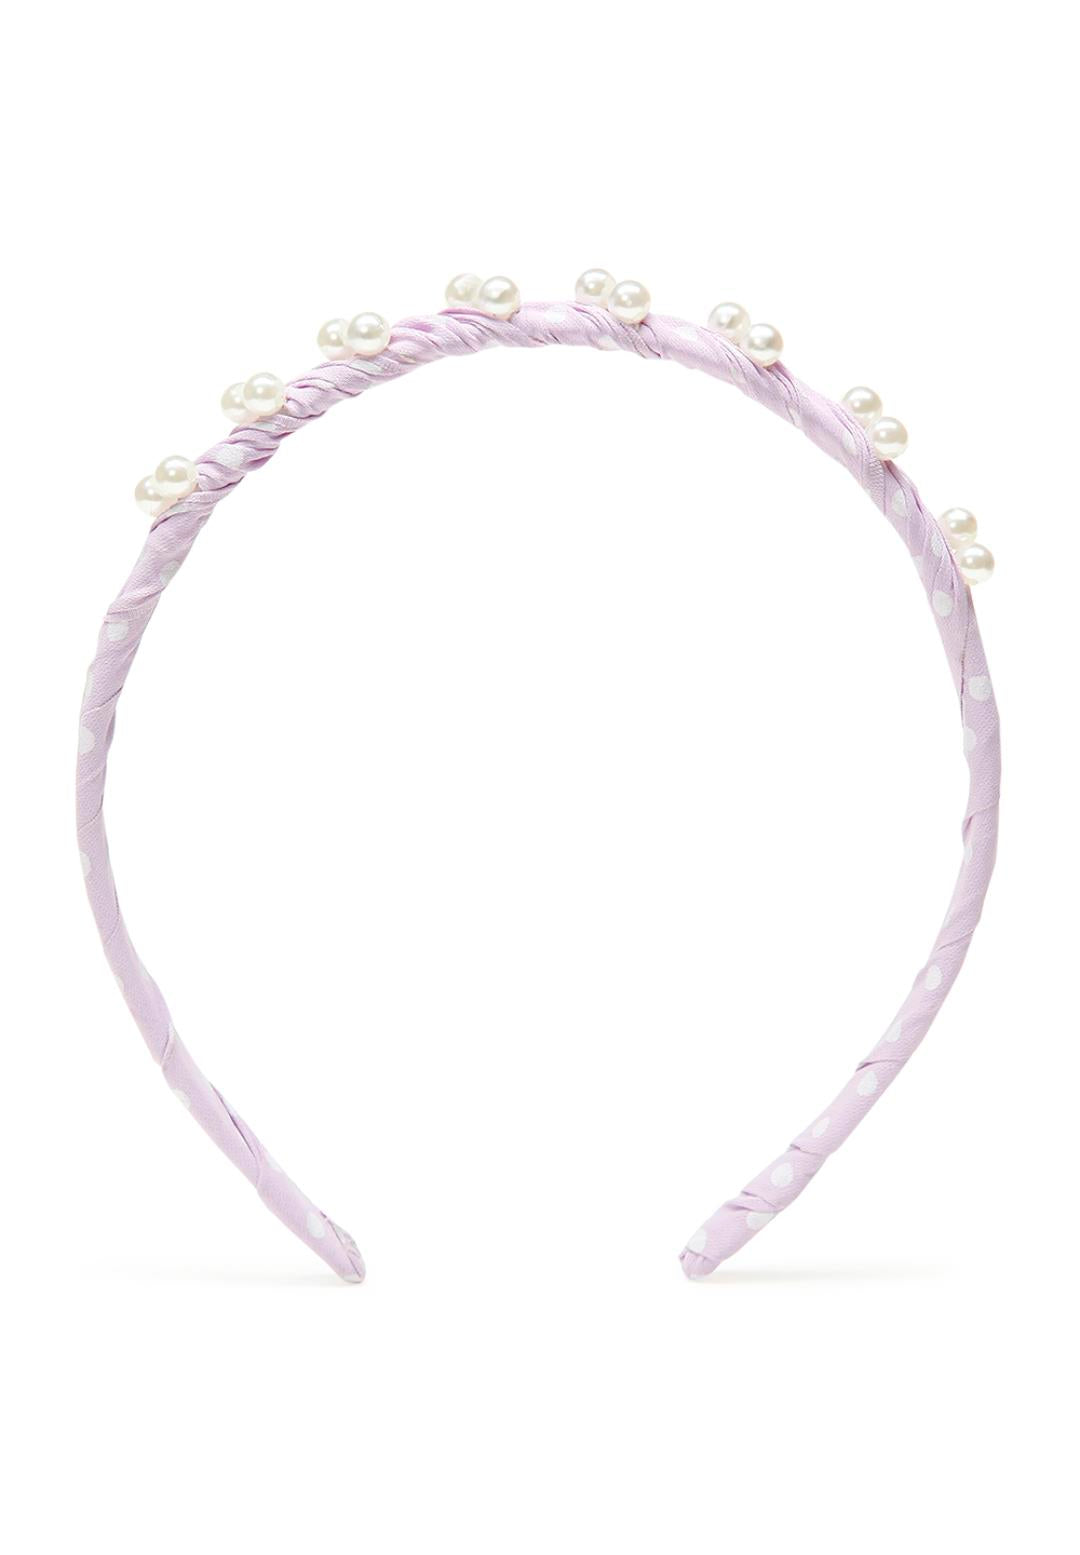 Stol'n Pink Ribbon spiral with Pearls on Plastic hairband for Girls